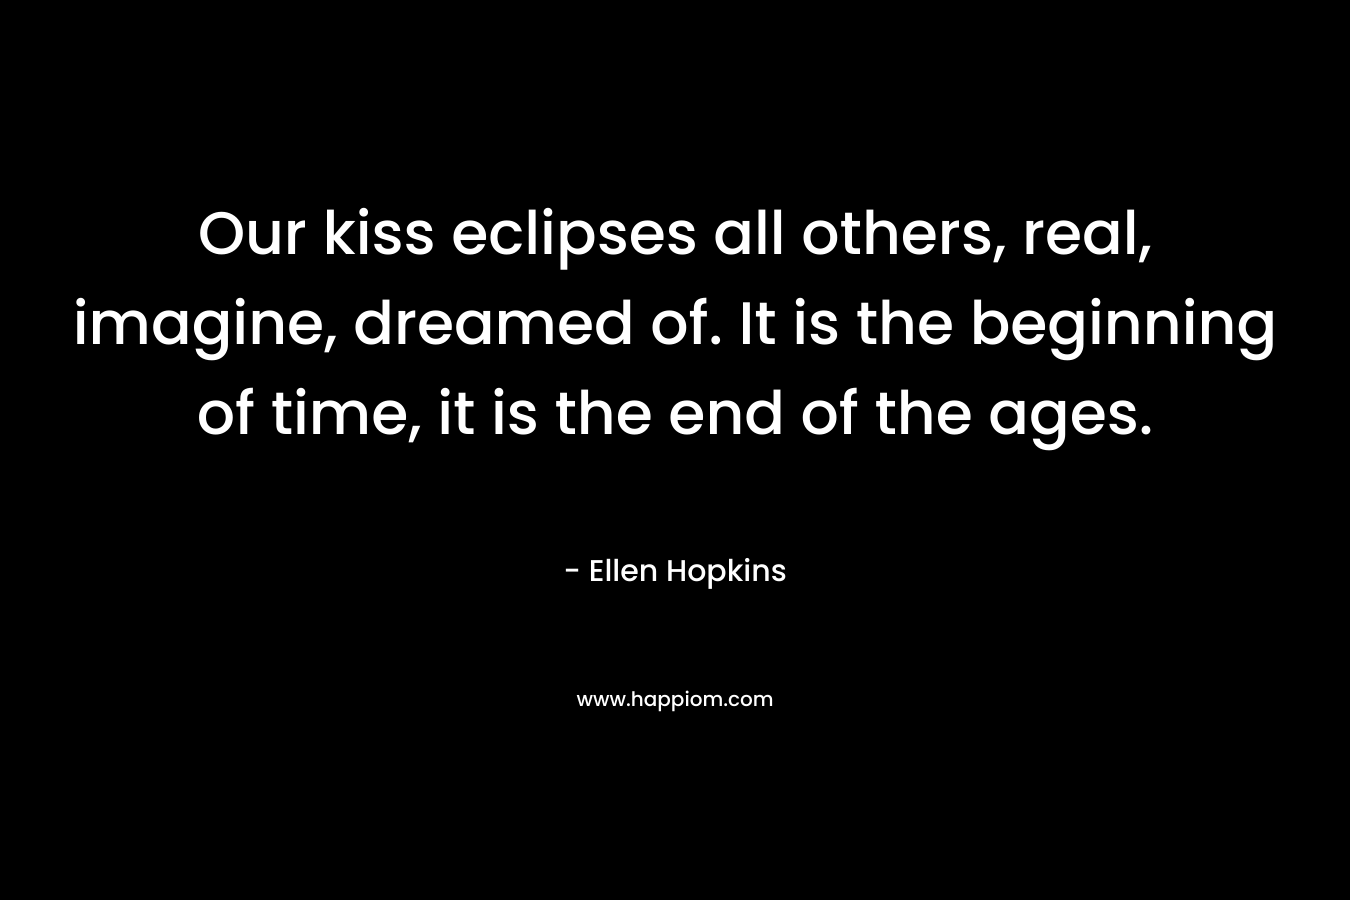 Our kiss eclipses all others, real, imagine, dreamed of. It is the beginning of time, it is the end of the ages. – Ellen Hopkins